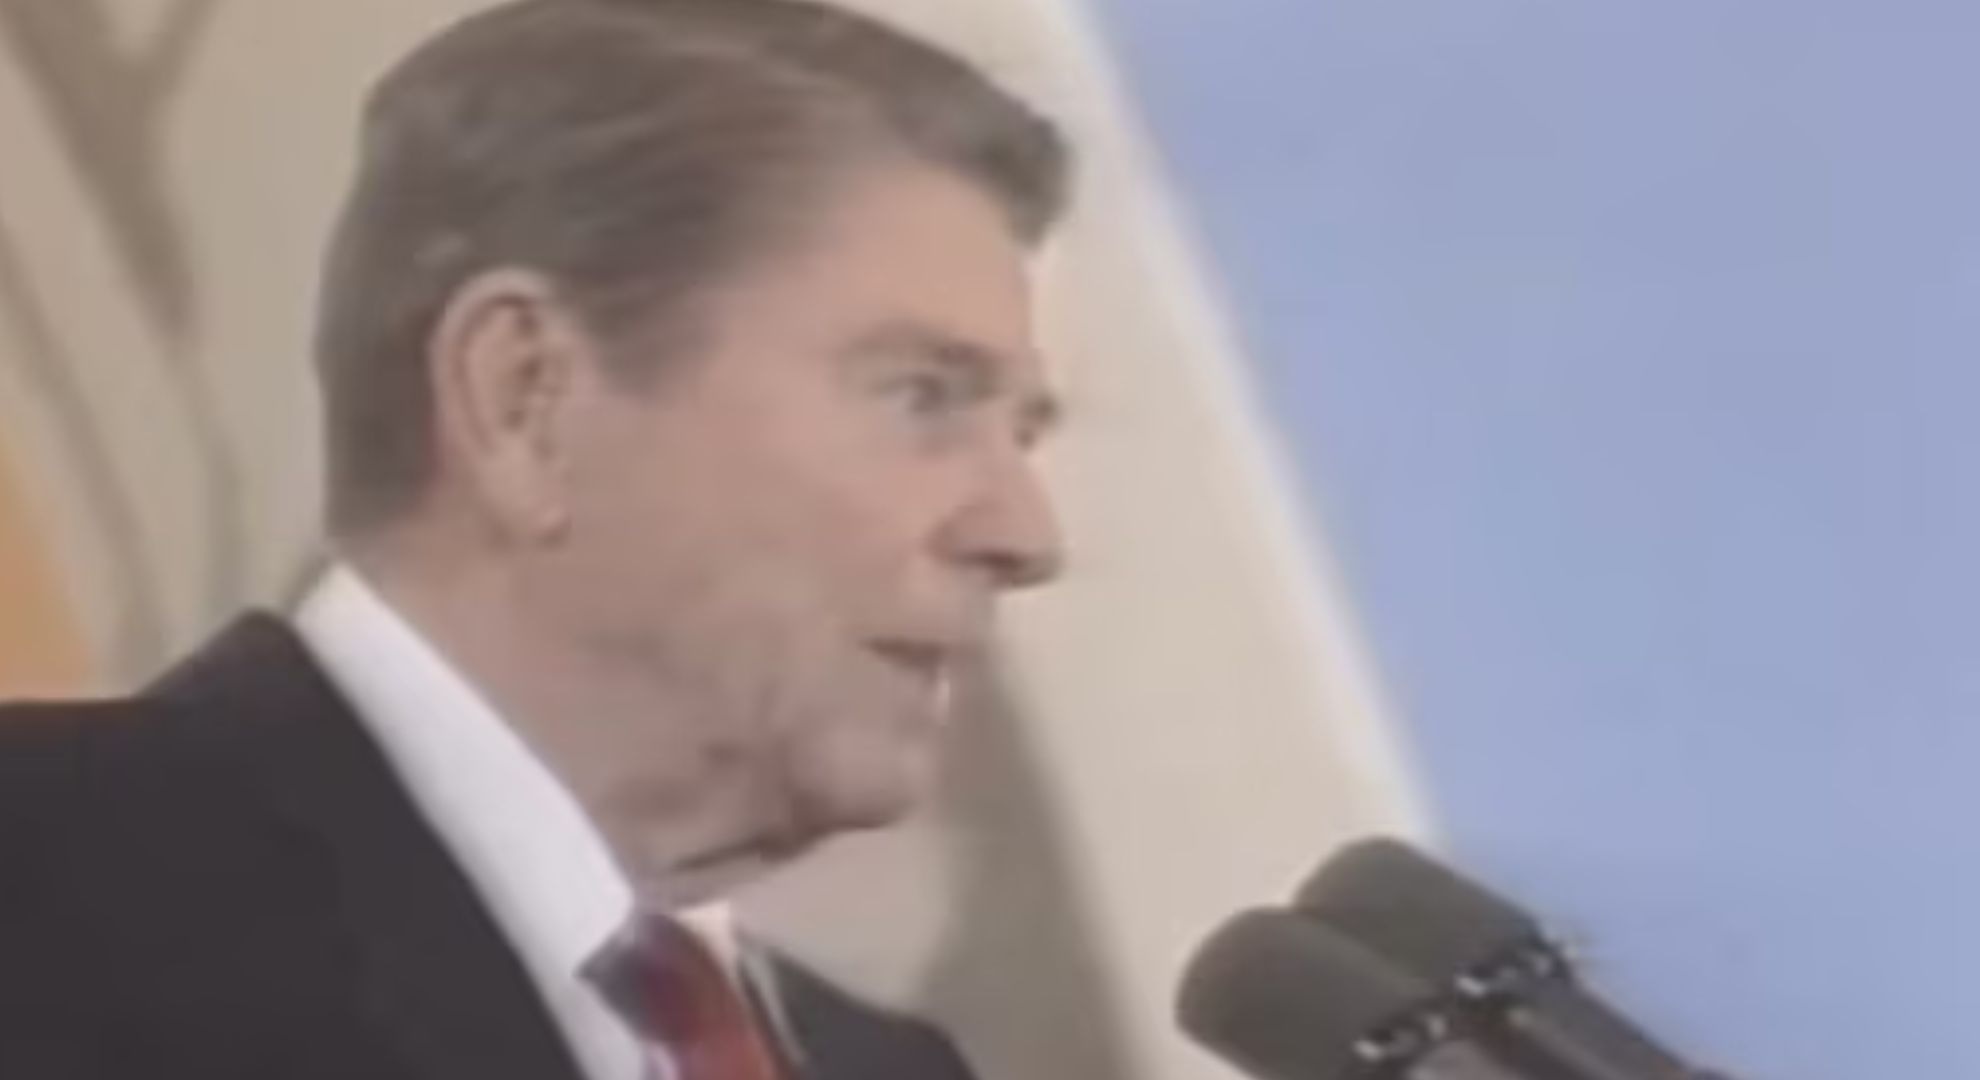 Ronald Reagan’s Reaction To Balloon Popping Post-Assassination Attempt